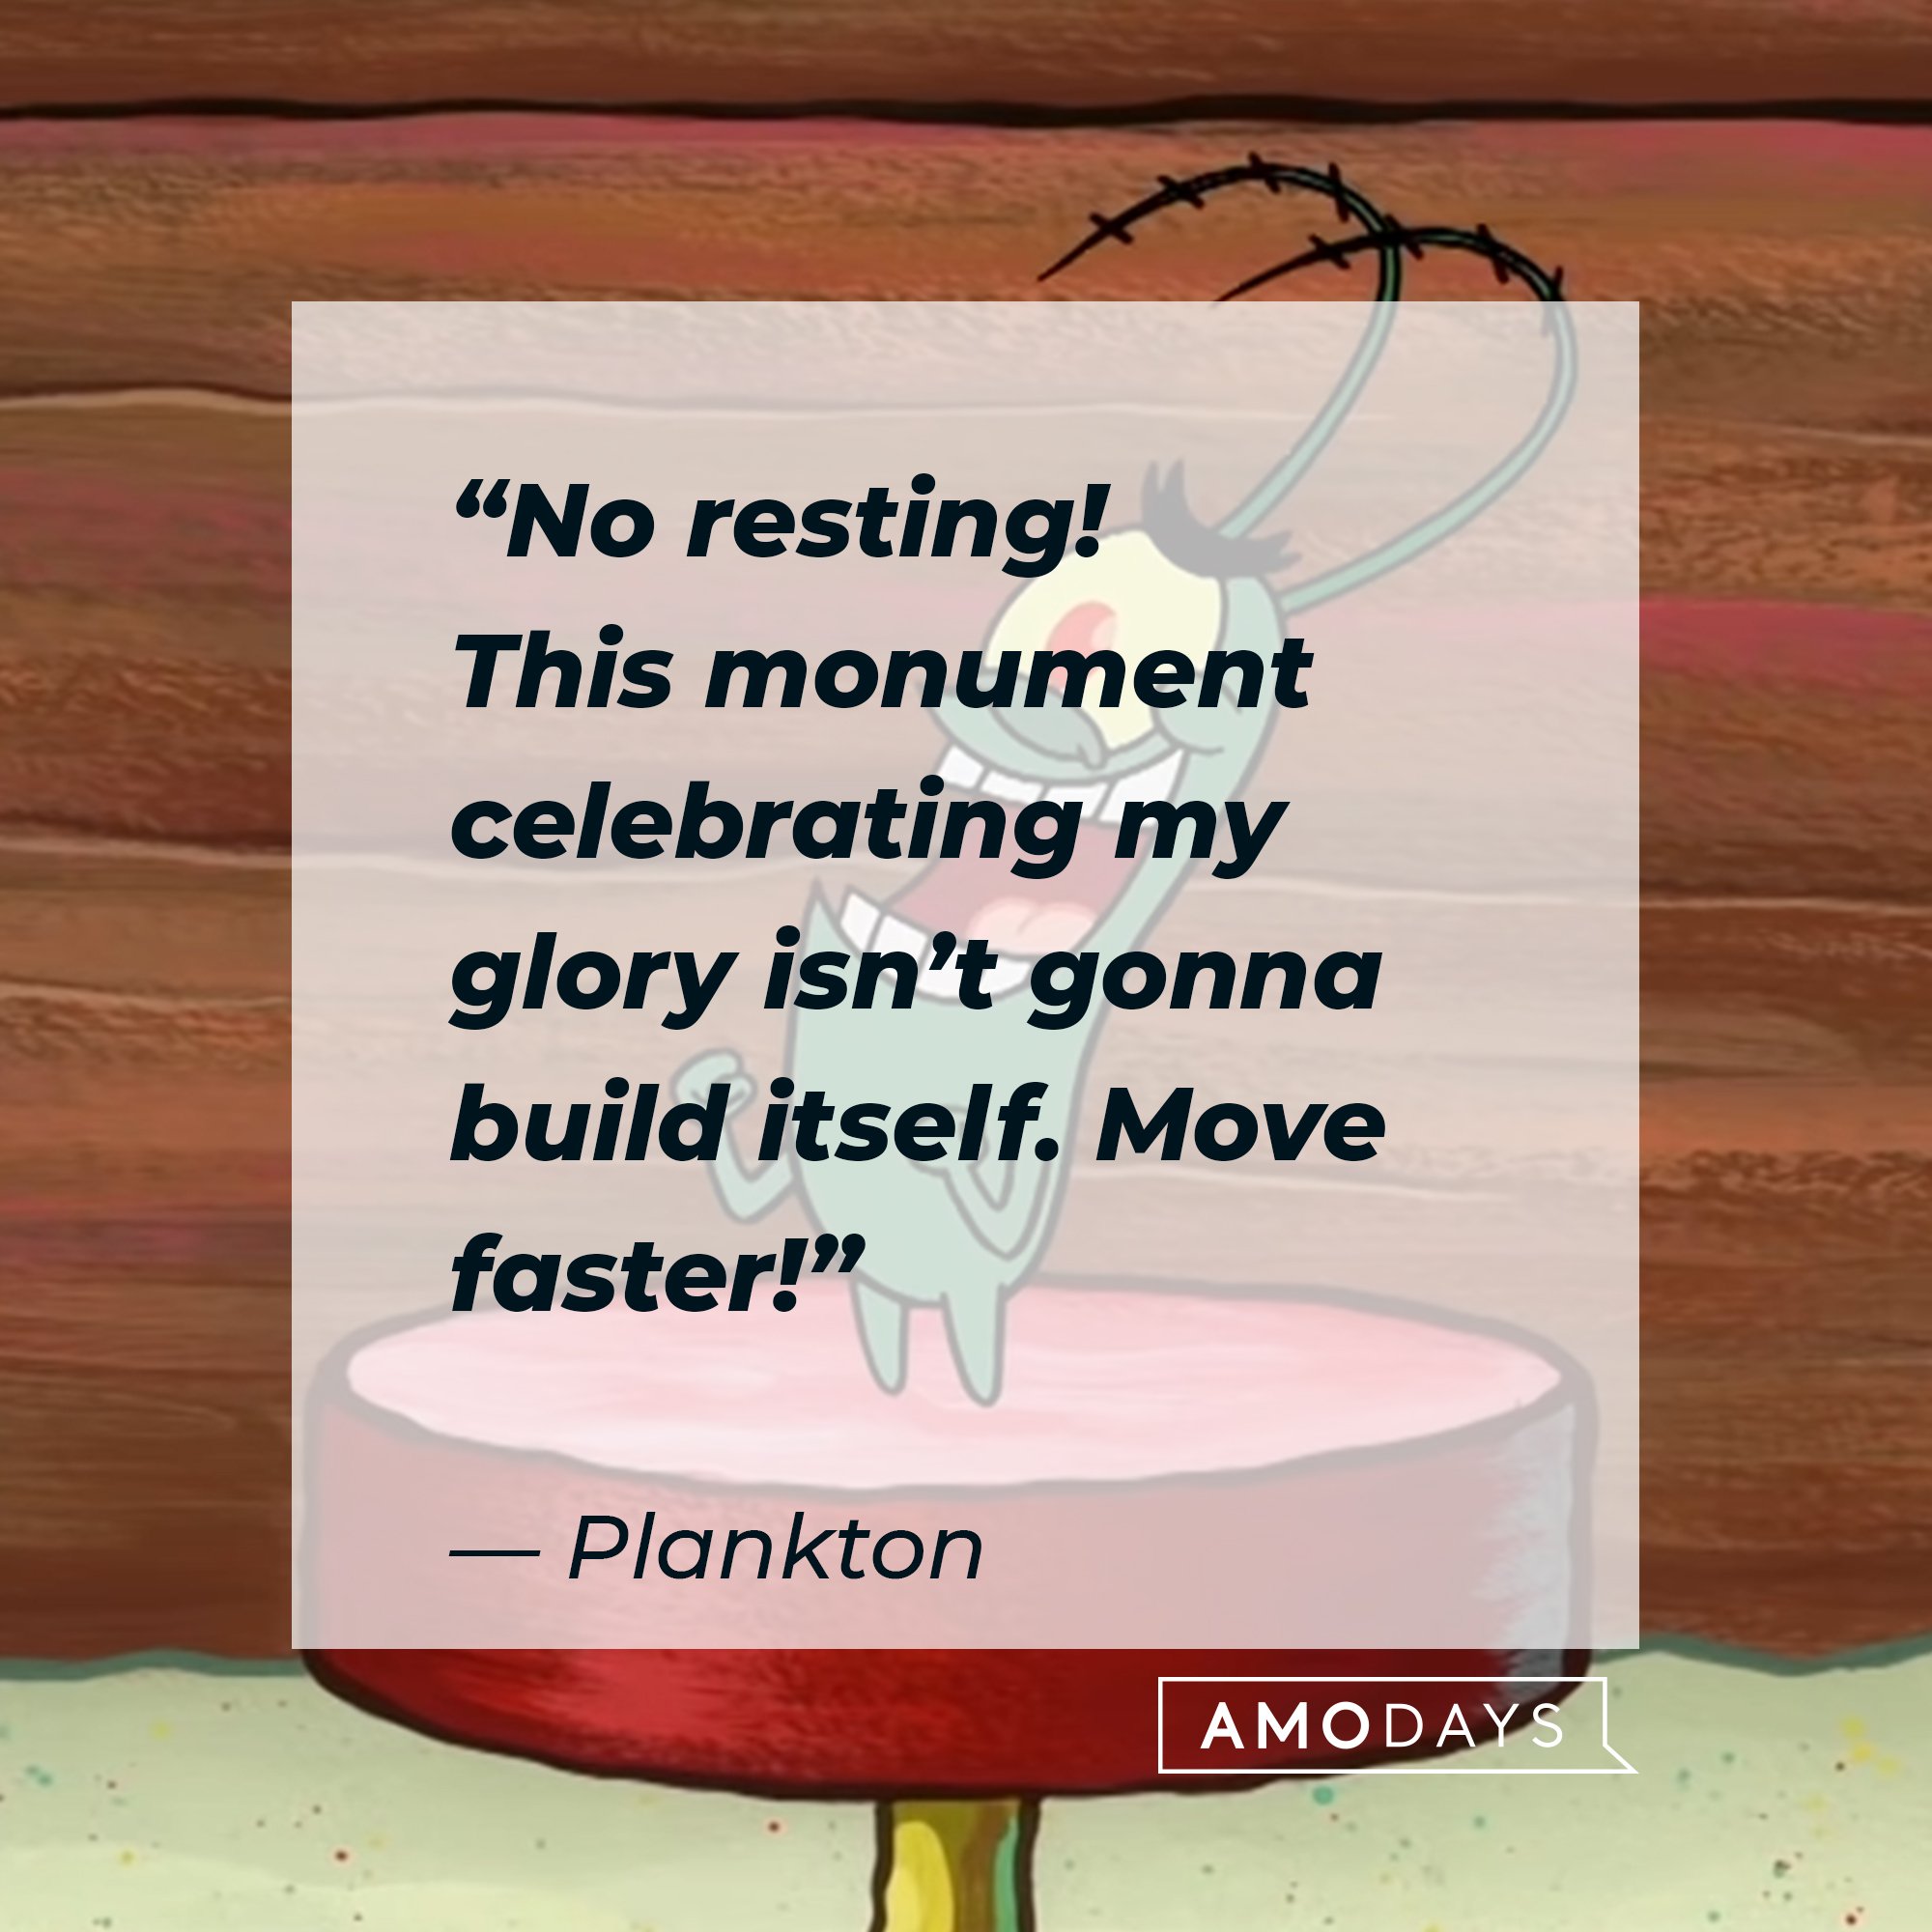 Plankton's quote: “No resting! This monument celebrating my glory isn’t gonna build itself. Move faster!” | Image: AmoDays